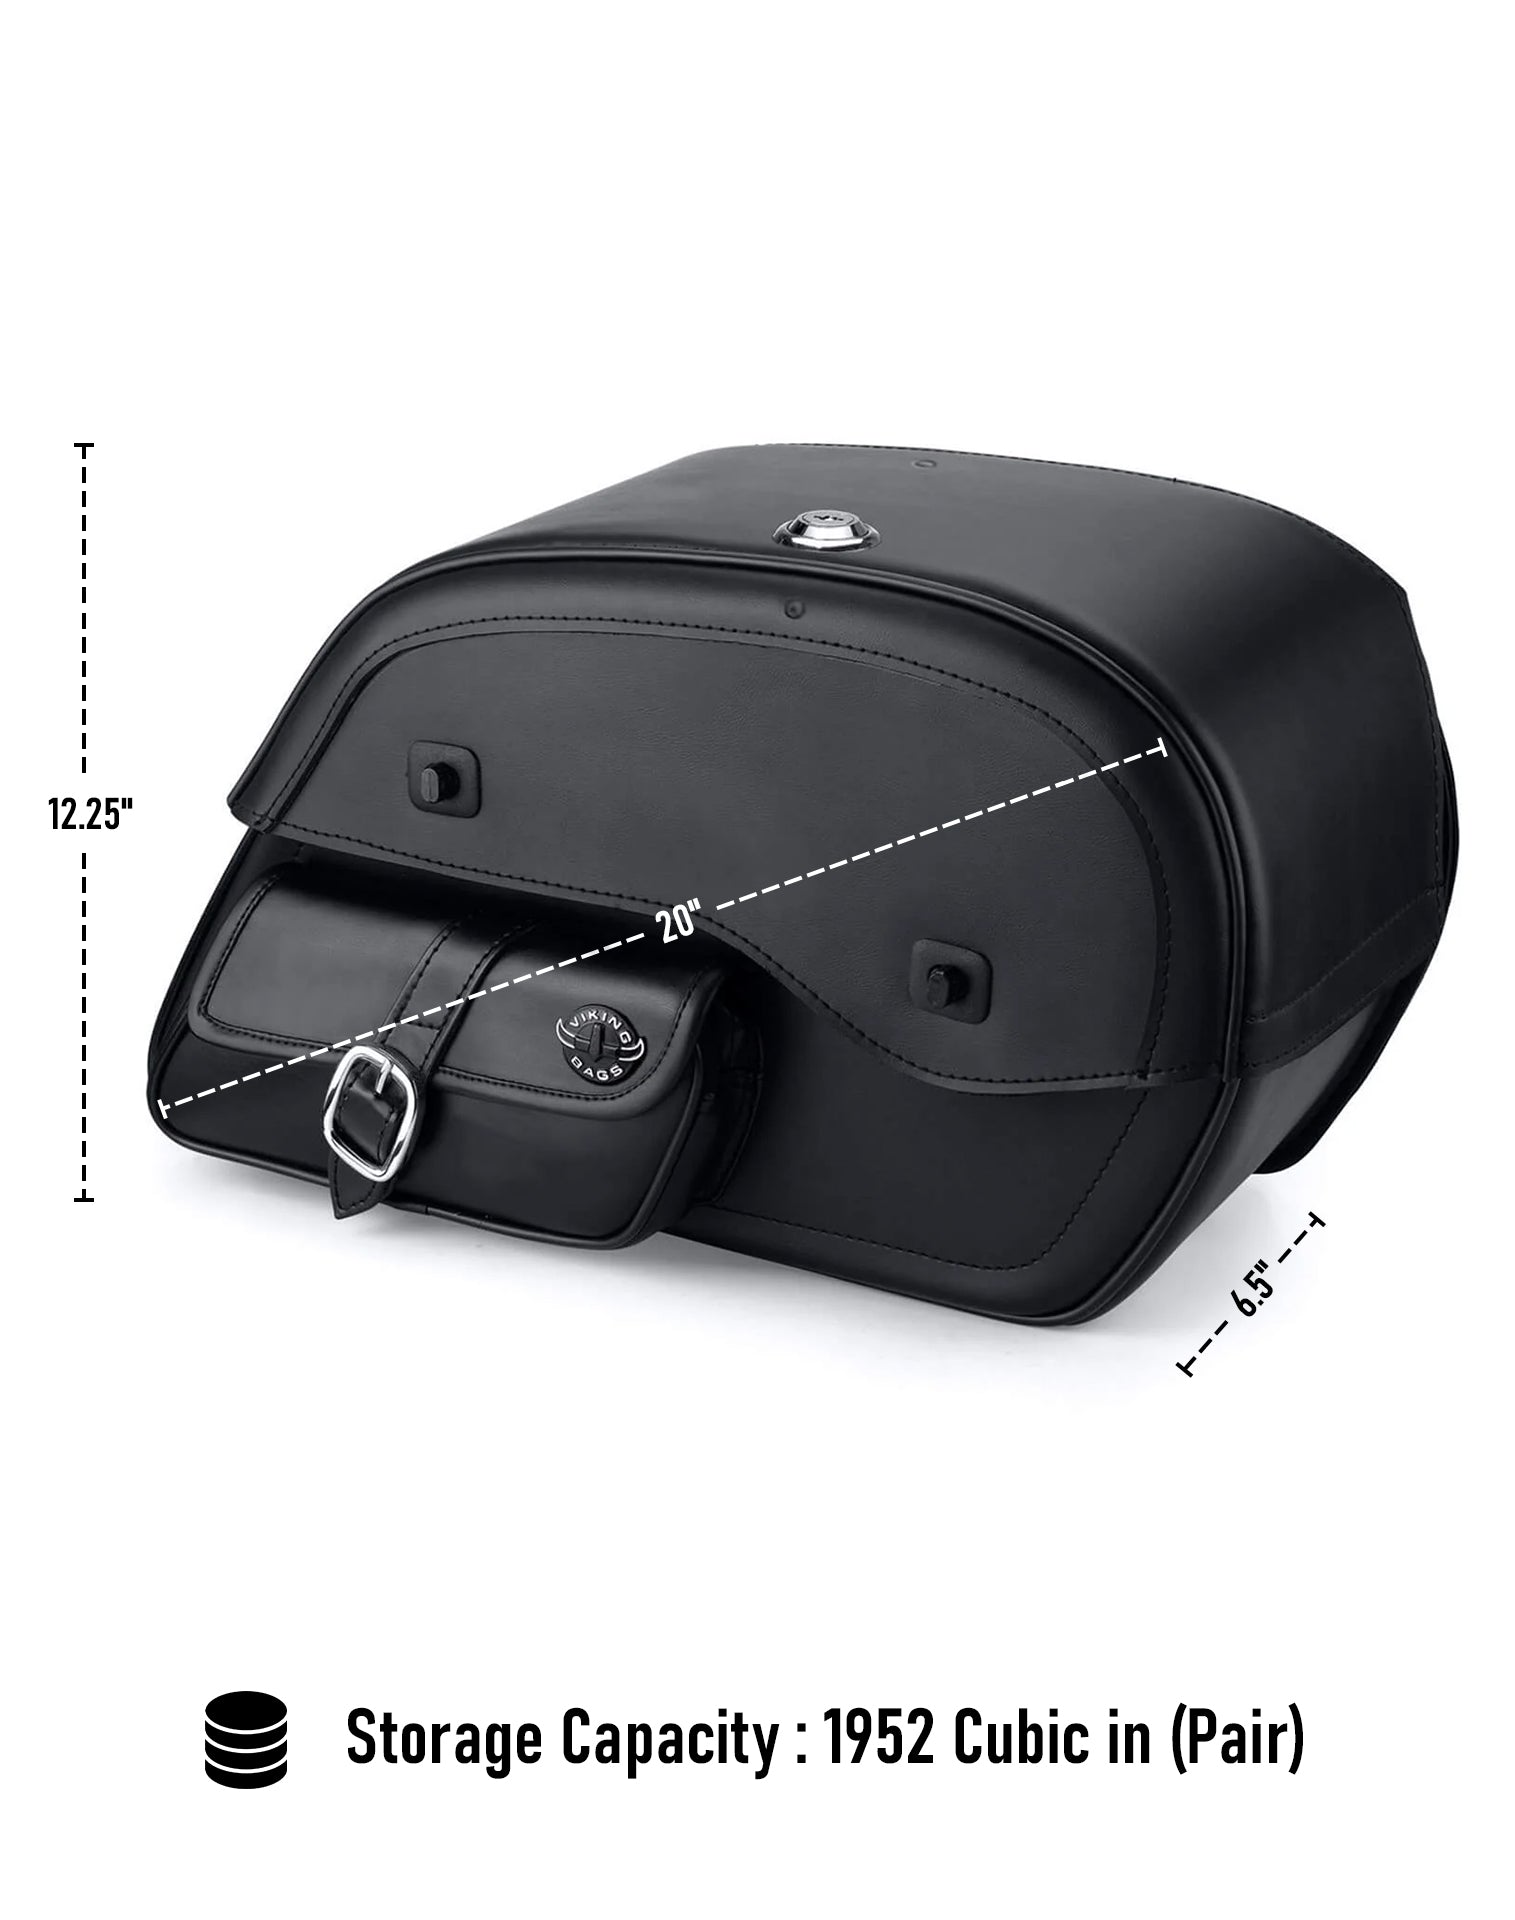 Viking Essential Side Pocket Large Honda Valkyrie 1500 Interstate Leather Motorcycle Saddlebags Can Store Your Ridings Gears